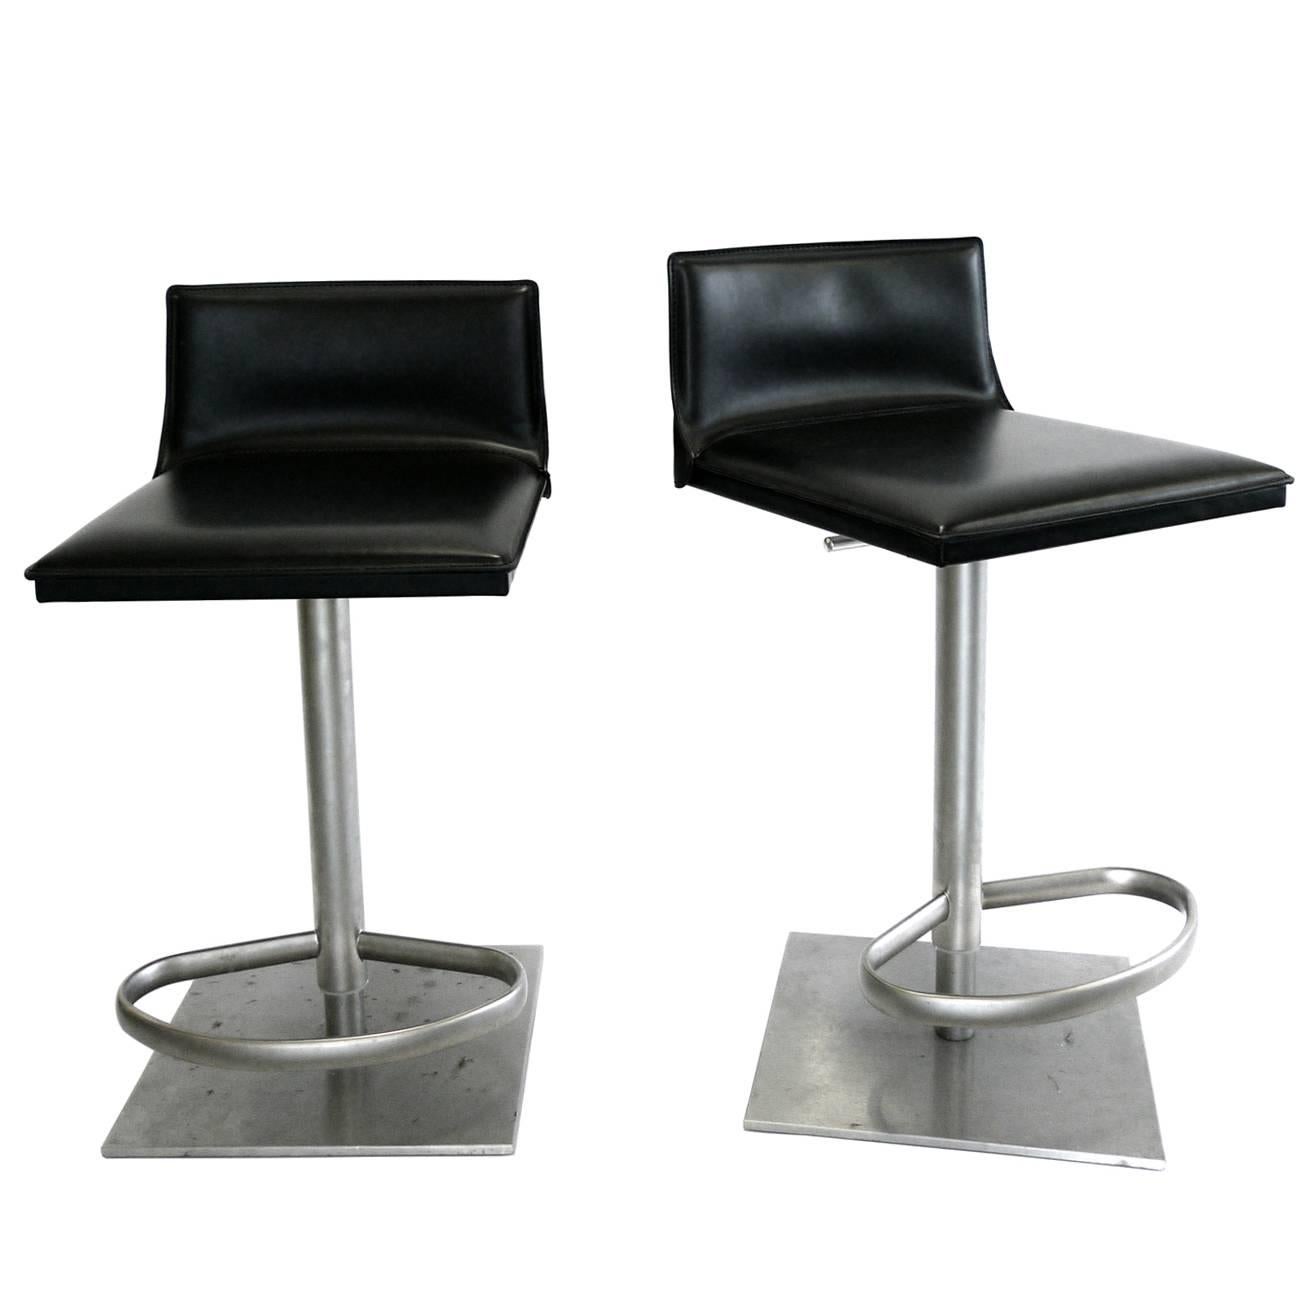 Italian Leather and Steel Height Adjustable Bar Stool by Frag